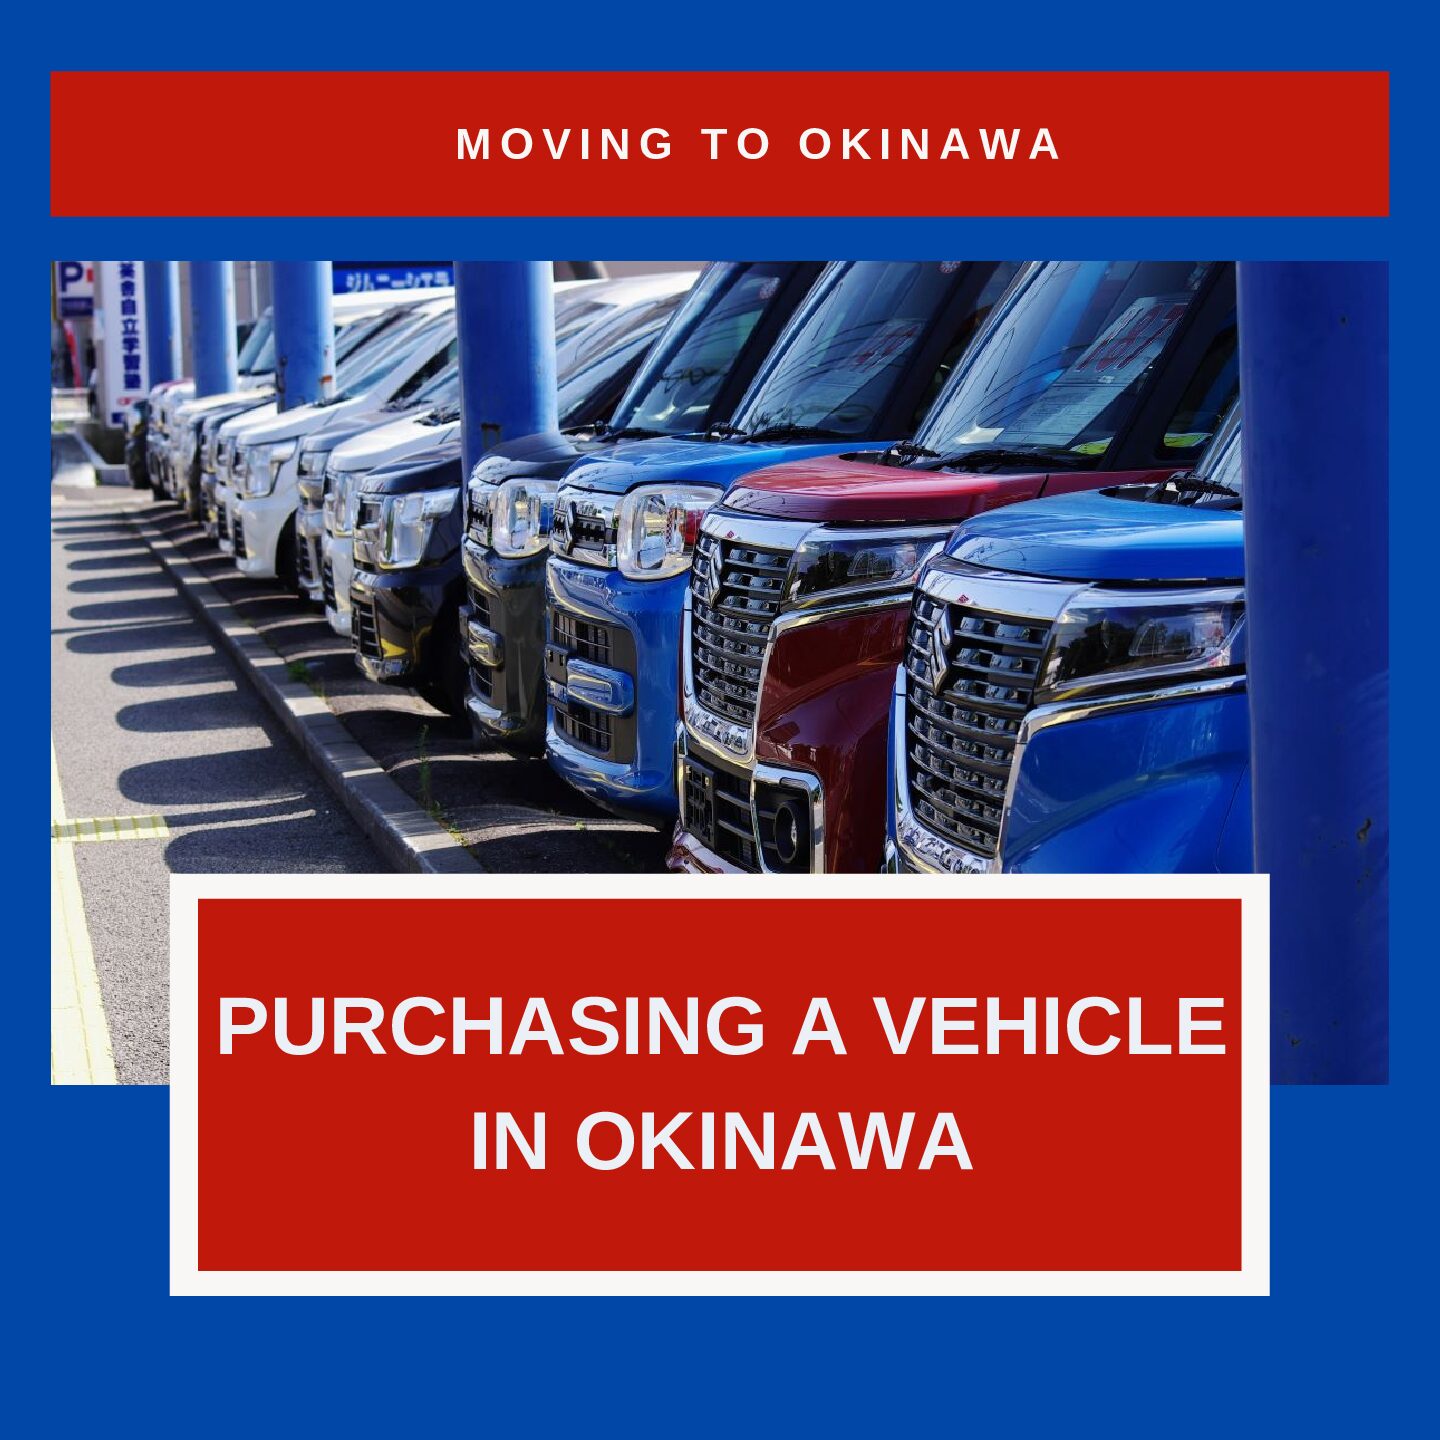 How To Purchase a Vehicle in Okinawa